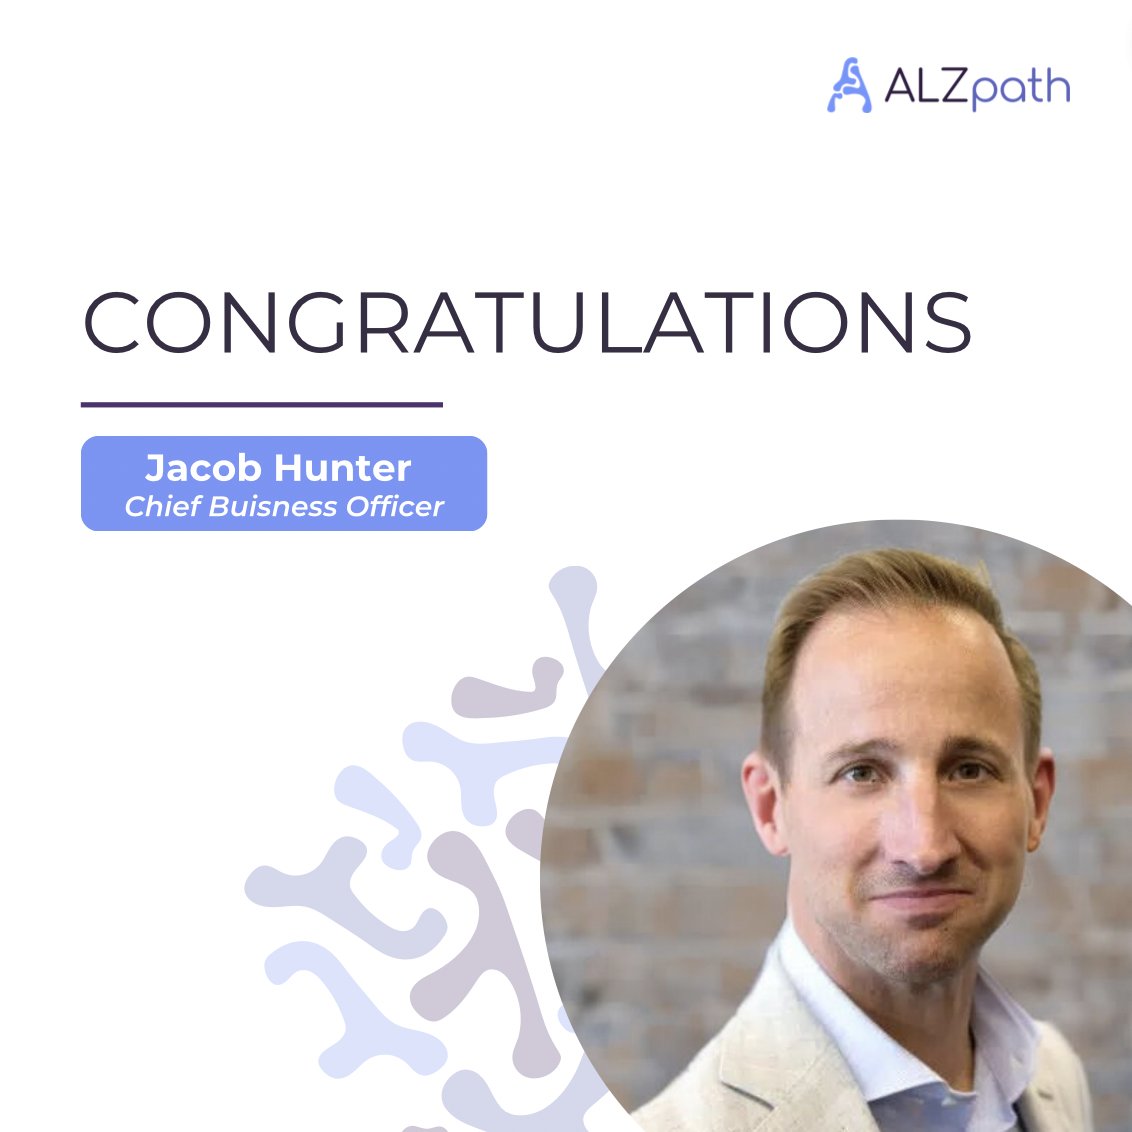 Jacob Hunter has been appointed as Chief Business Officer at #ALZpath! With 15+ years of biotech & diagnostic business development experience, Jake's expertise will propel us forward in developing innovative Alzheimer's diagnostic solutions! #Leadership